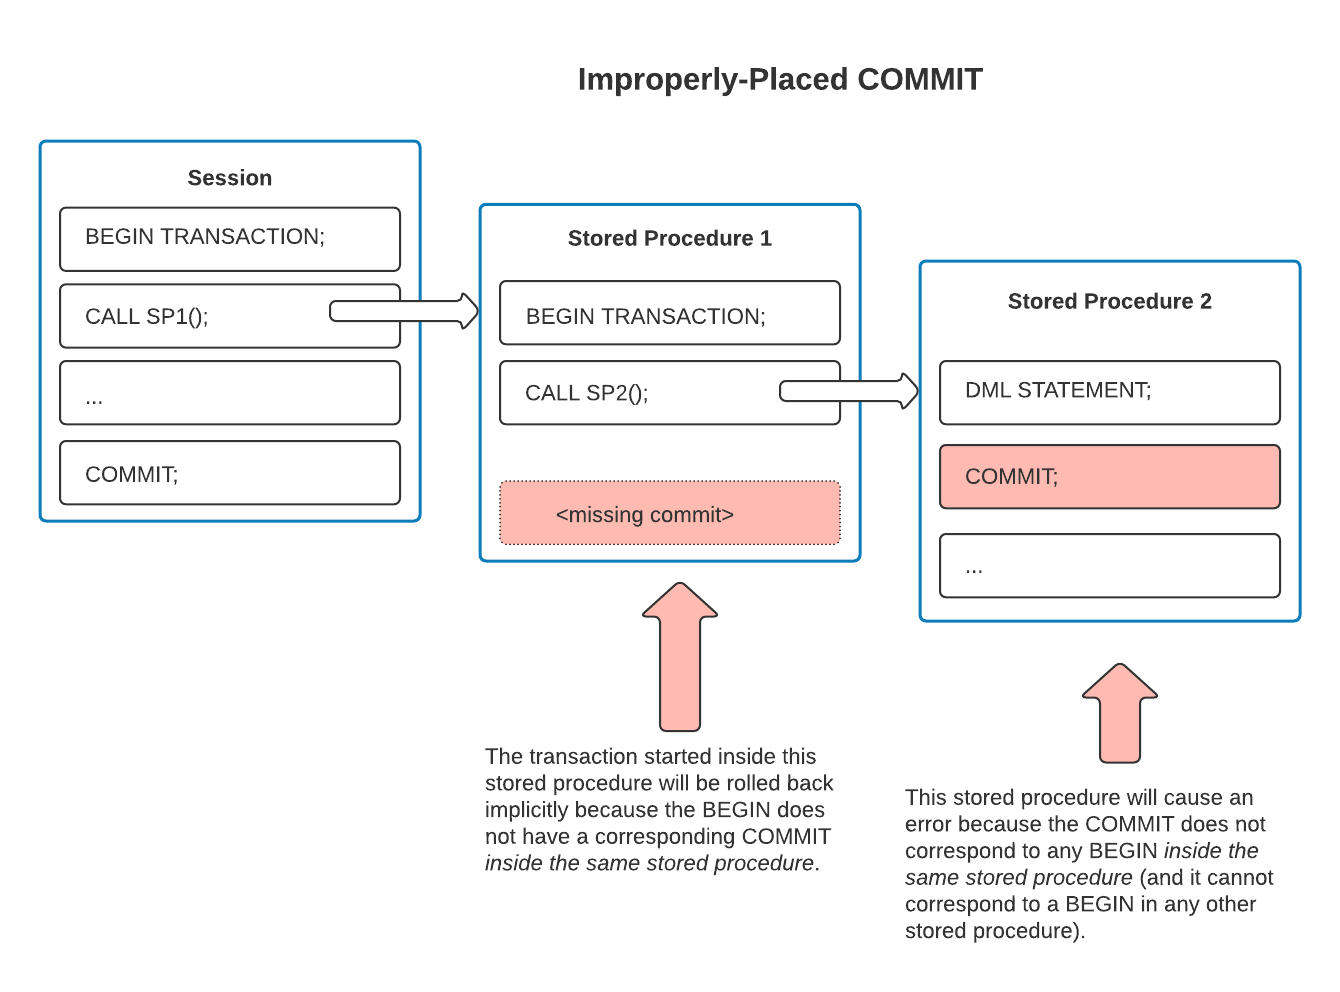 Illustration of two stored procedures that create improperly-scoped transactions.